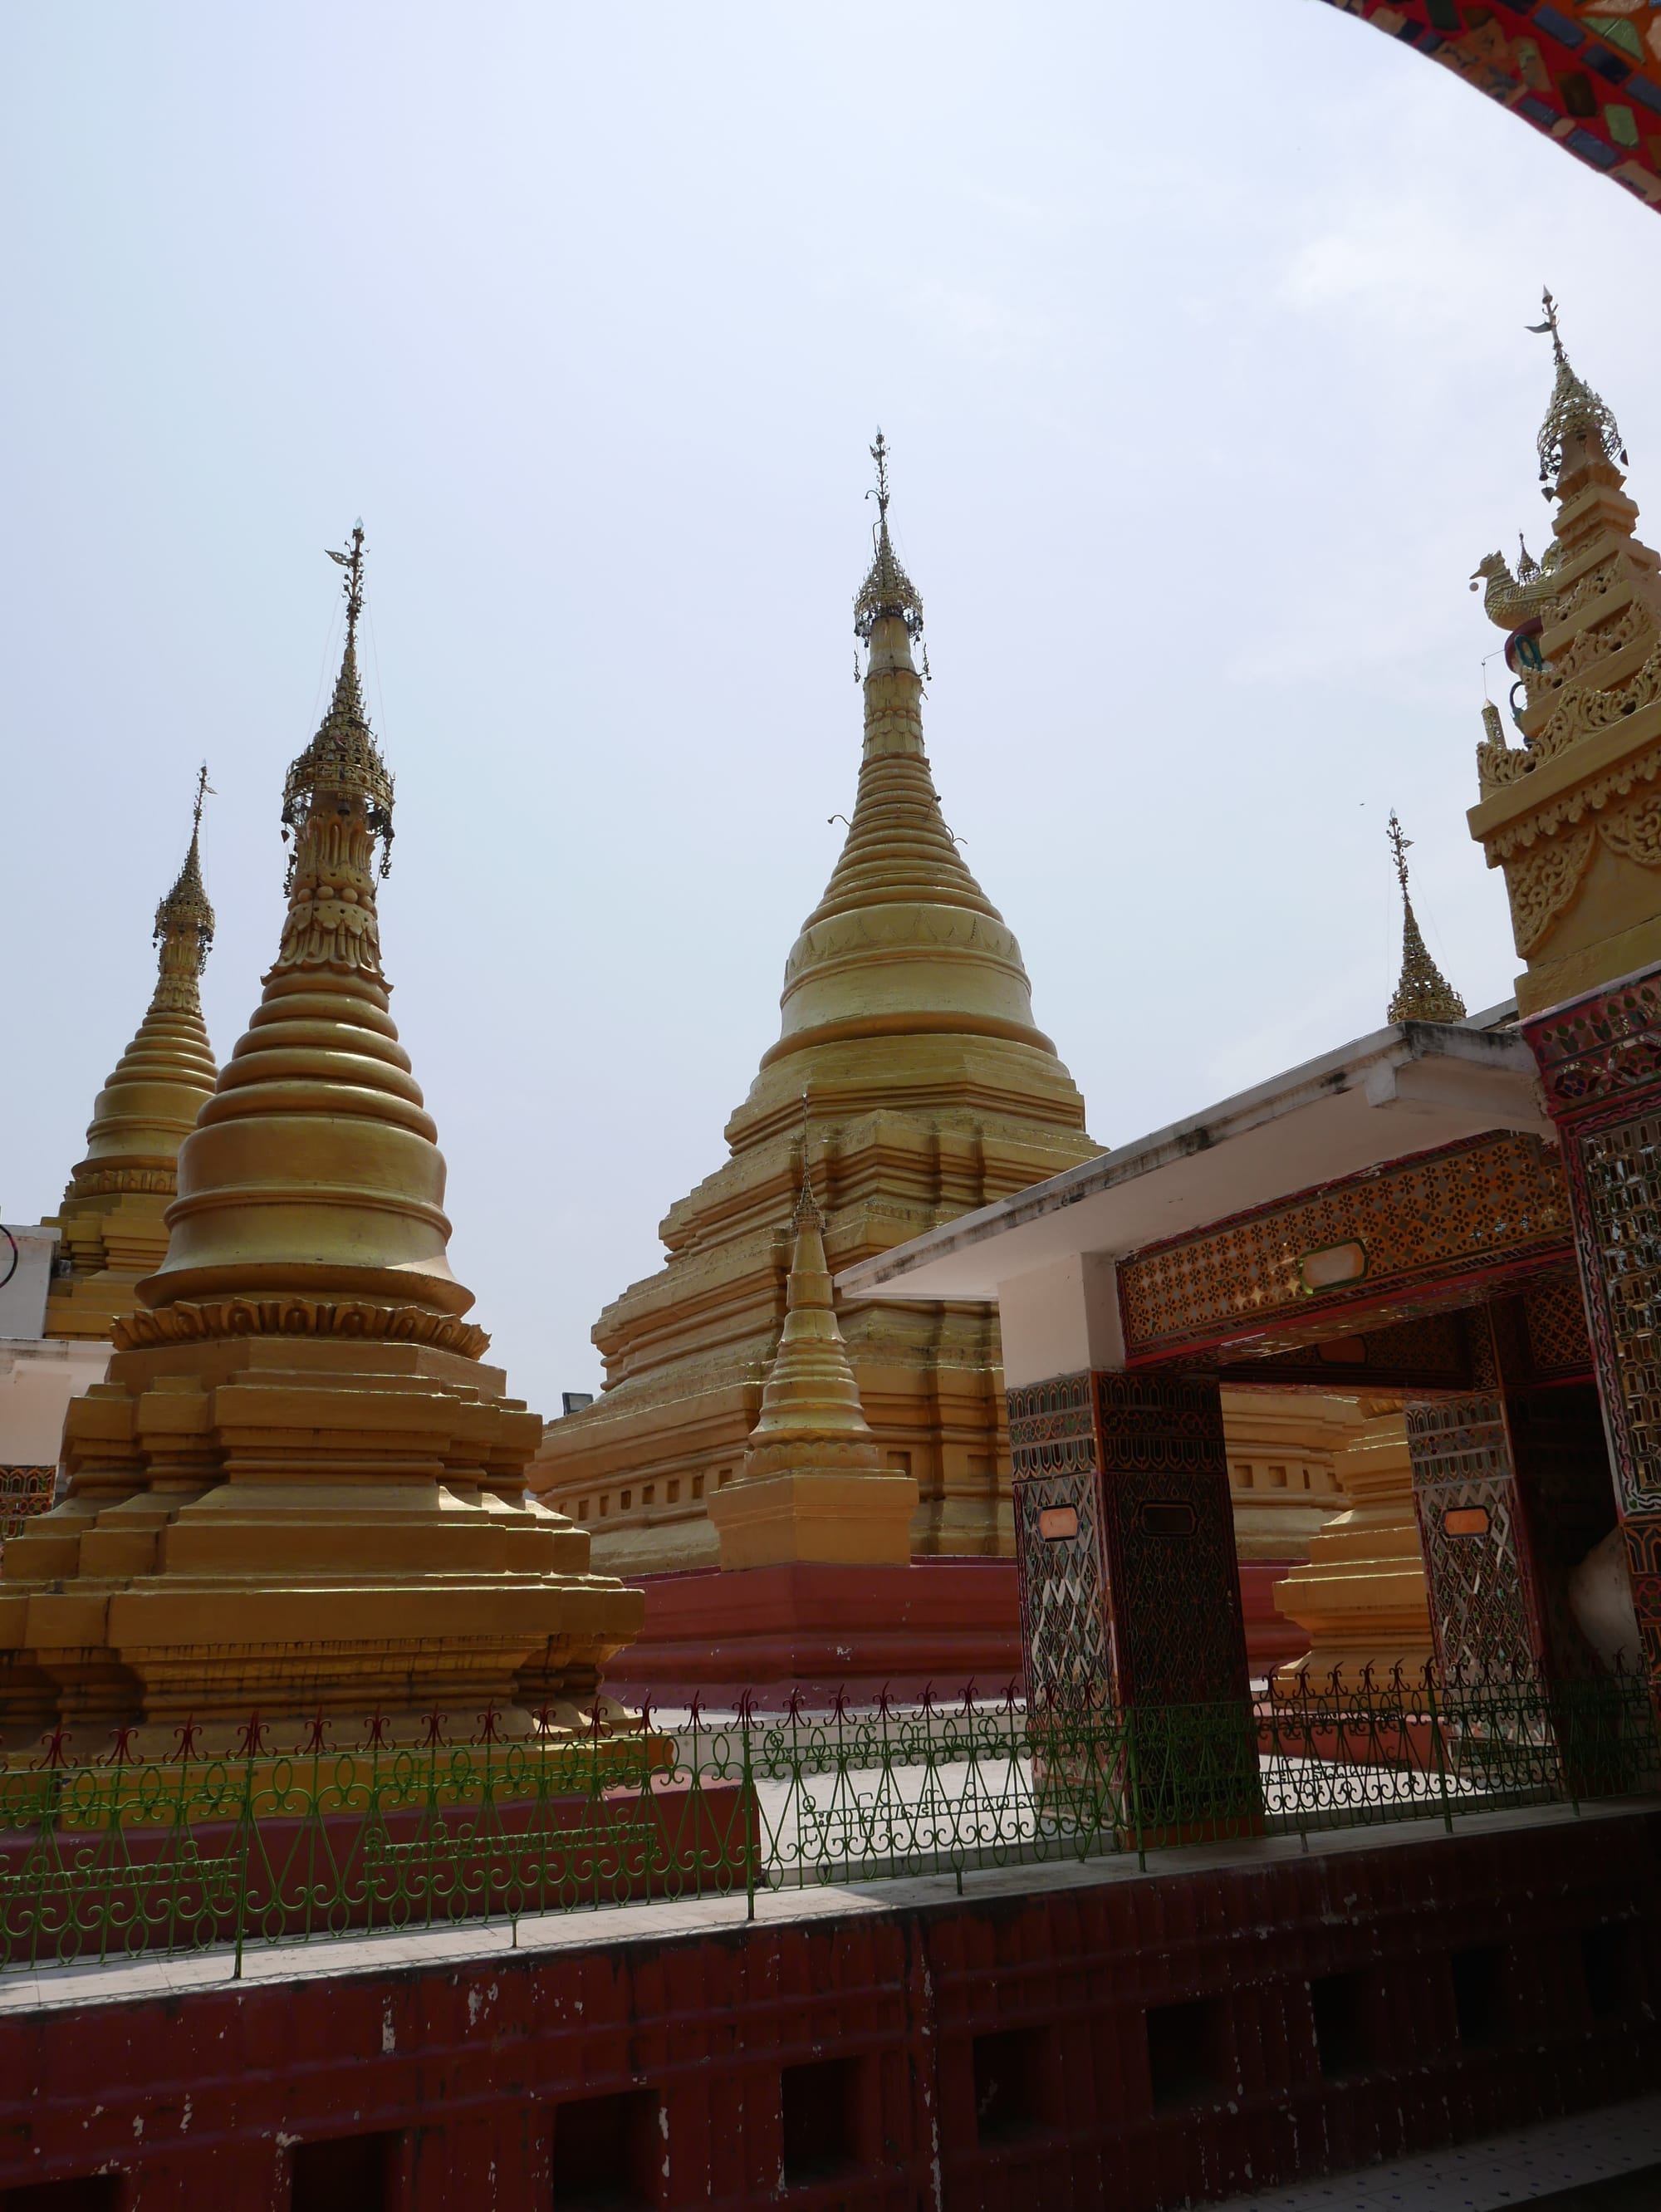 Photo by Author — more pagodas on Mandalay Hill